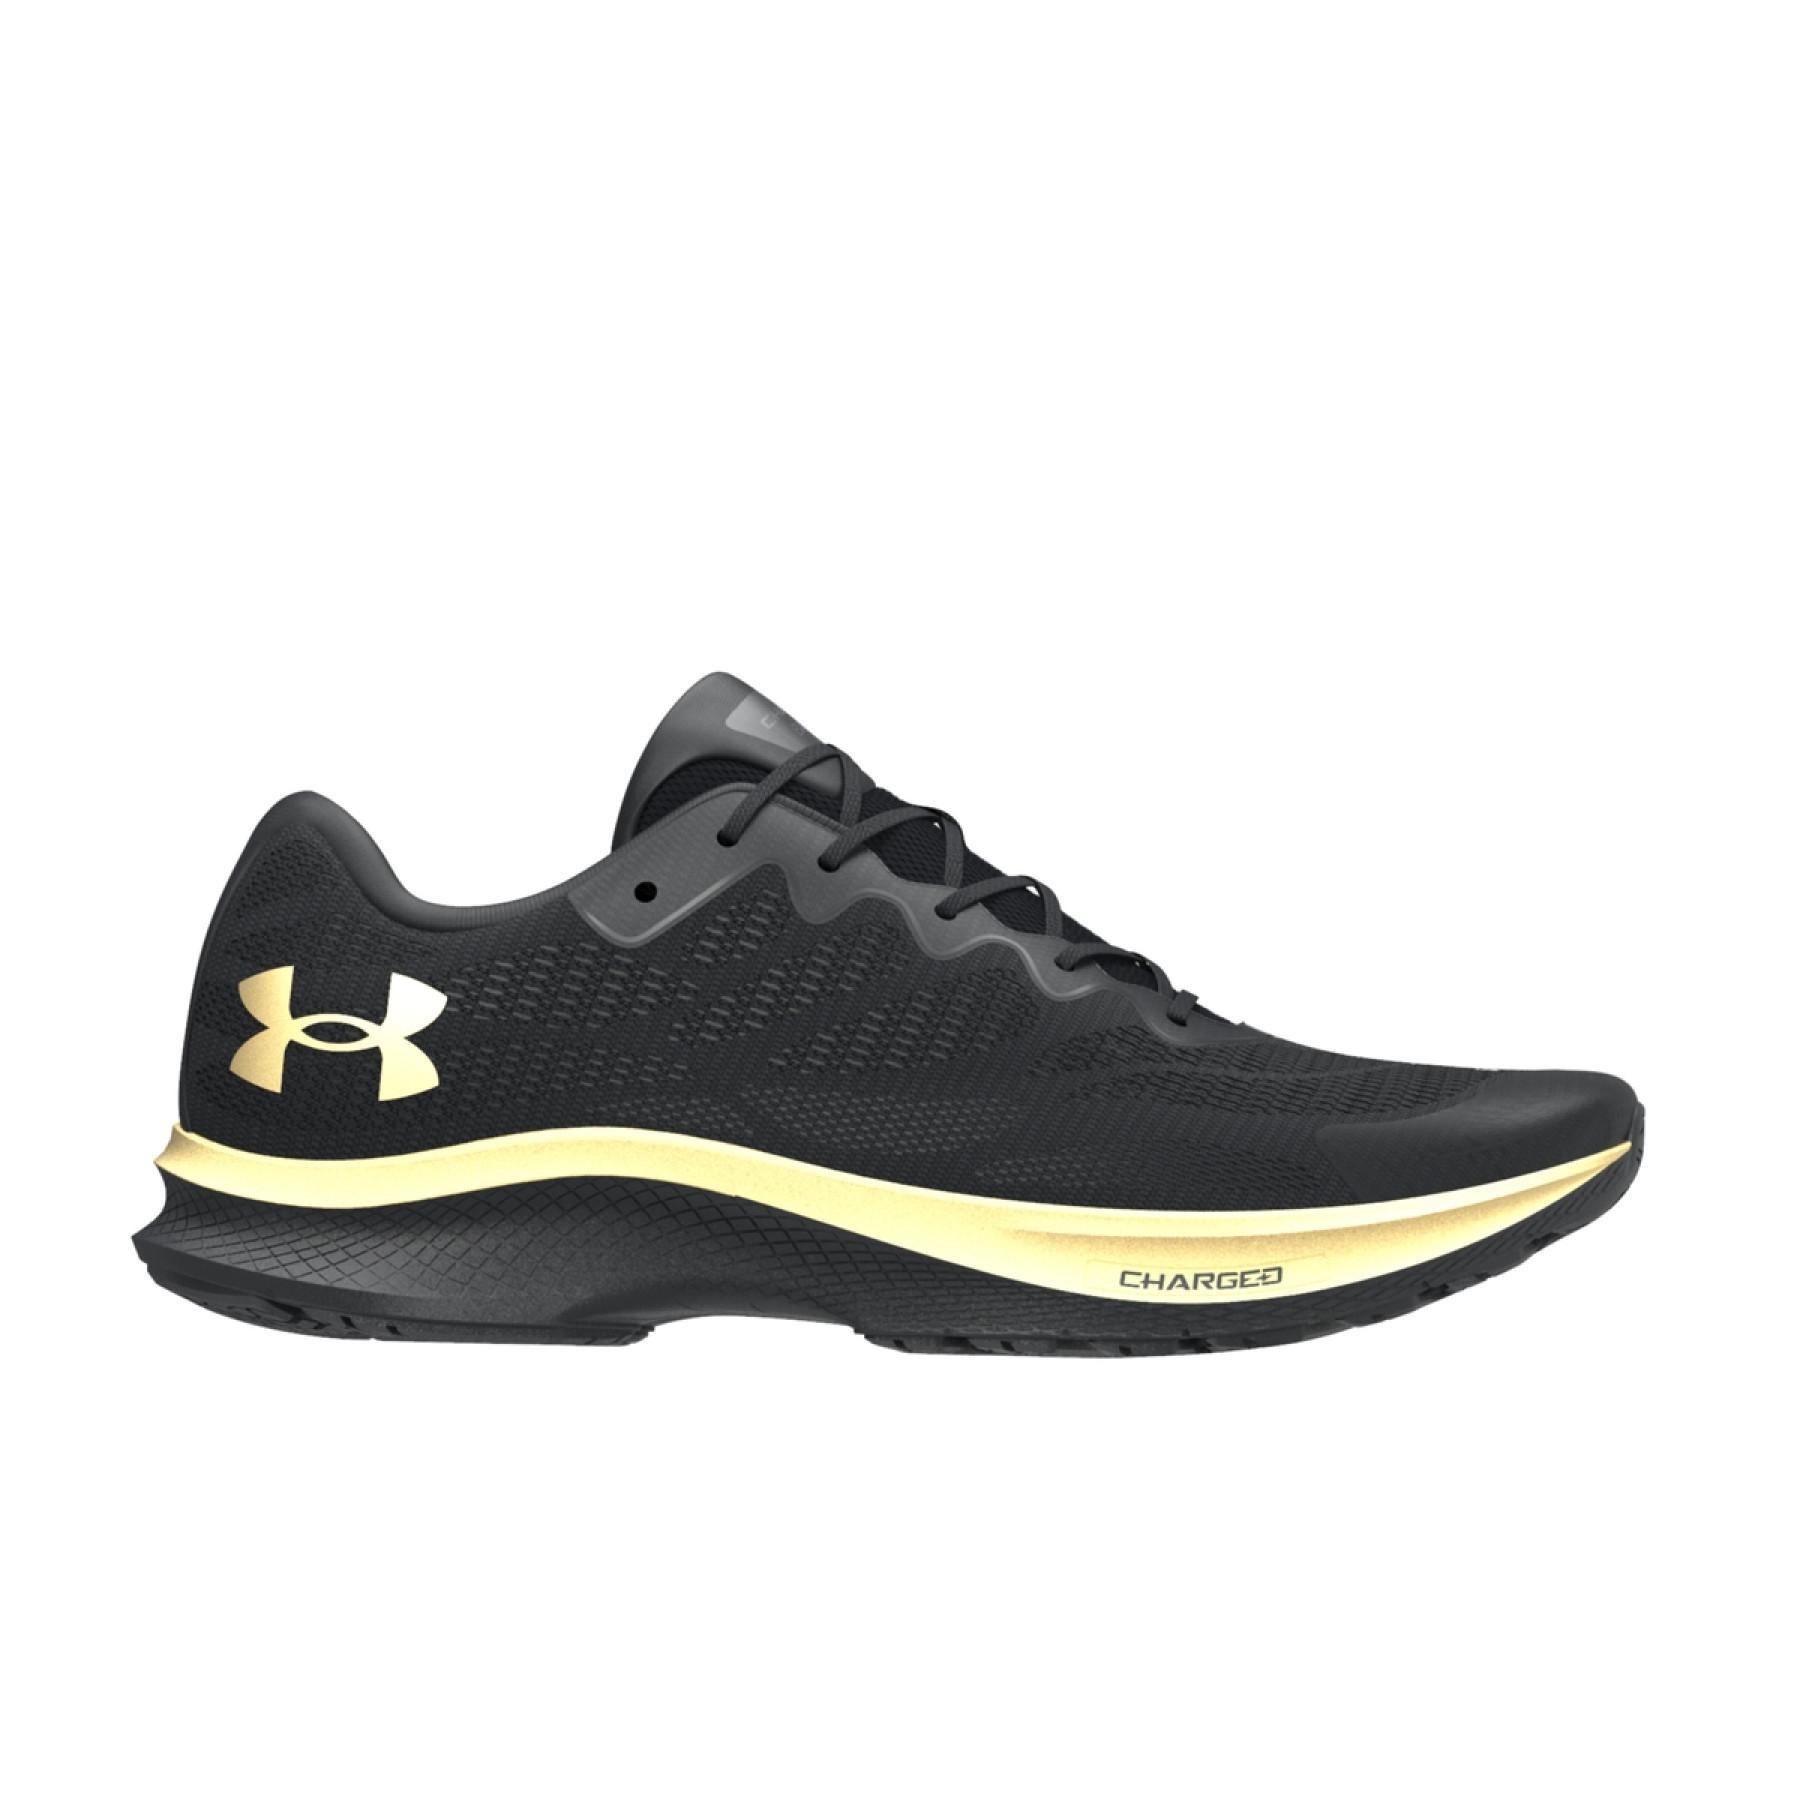 Loopschoenen Under Armour Charged Bandit 6